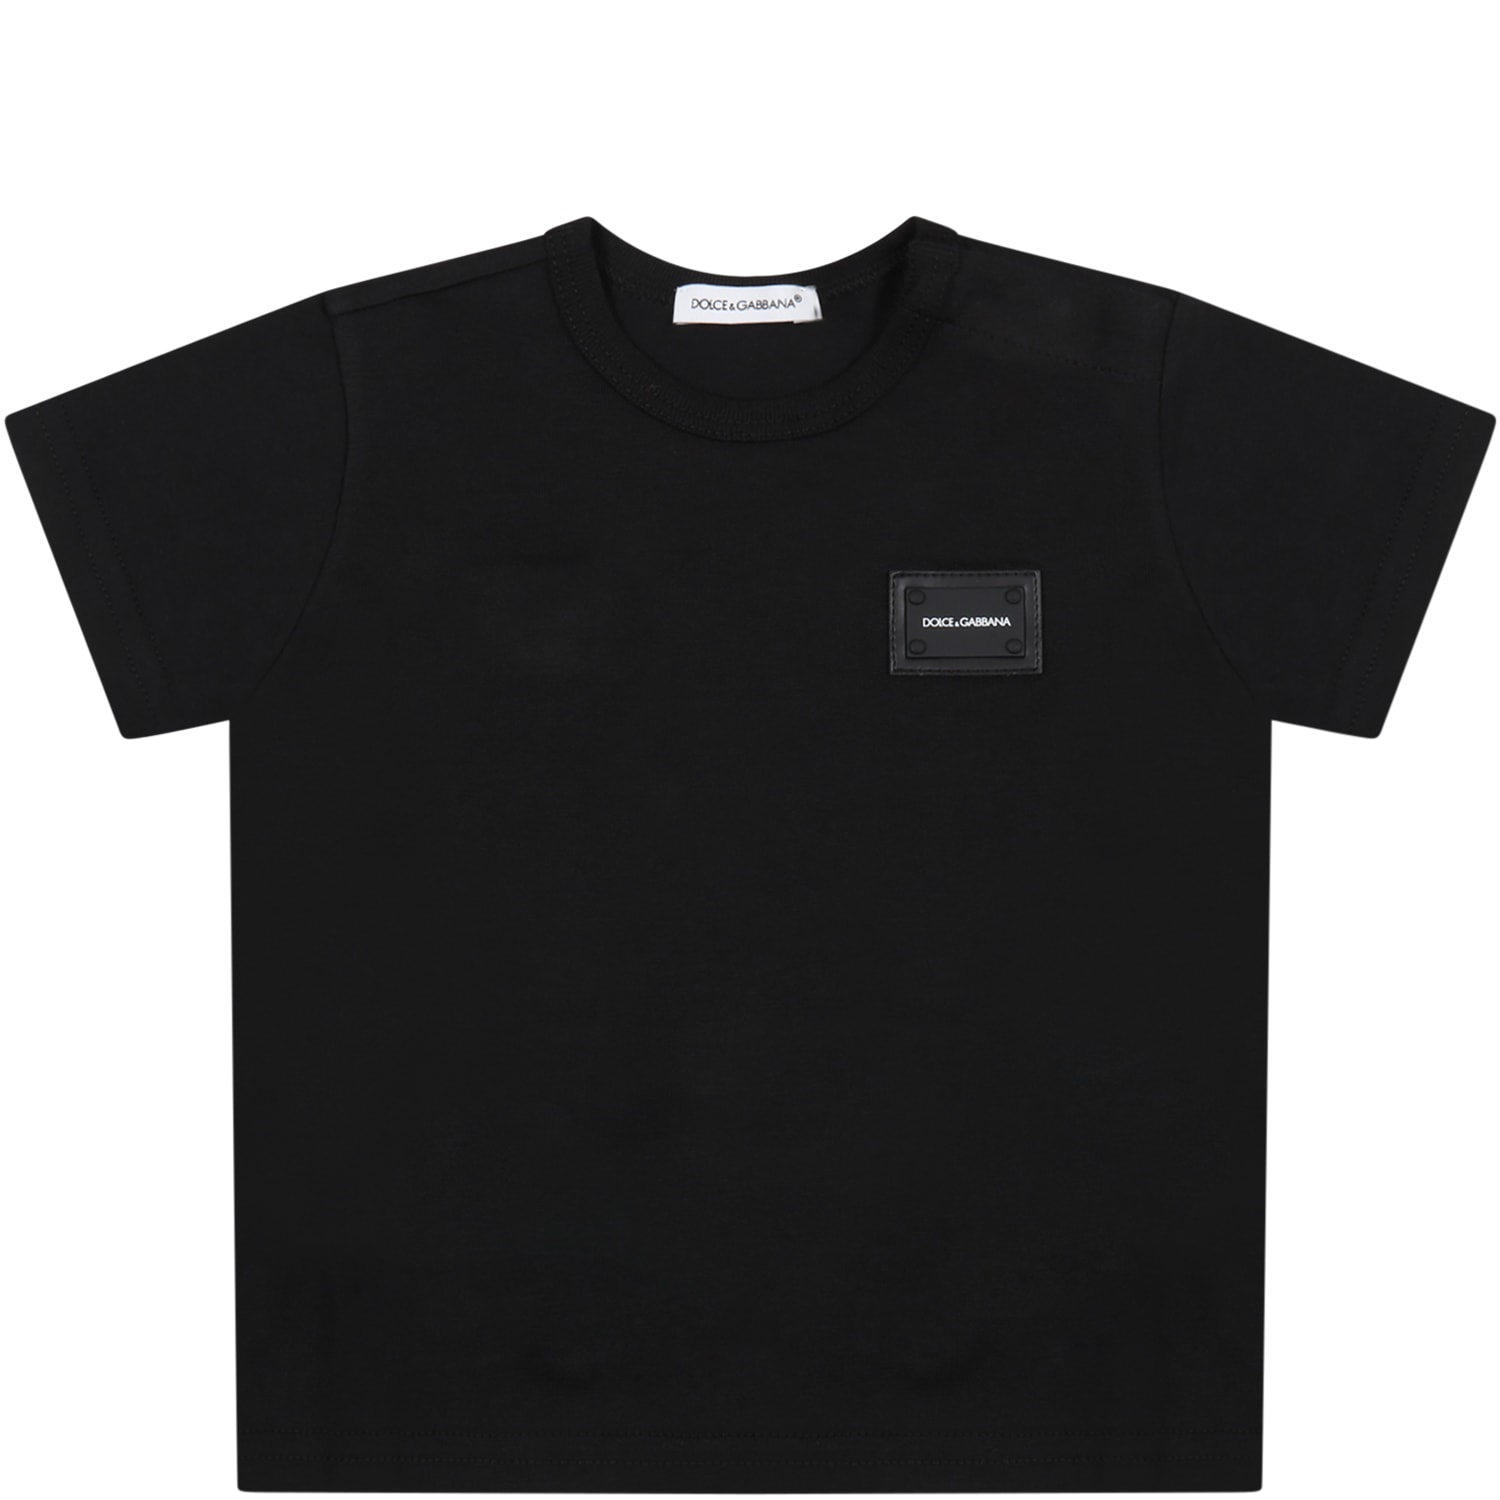 DOLCE & GABBANA BLACK T-SHIRT FOR BABY KIDS WITH LOGO